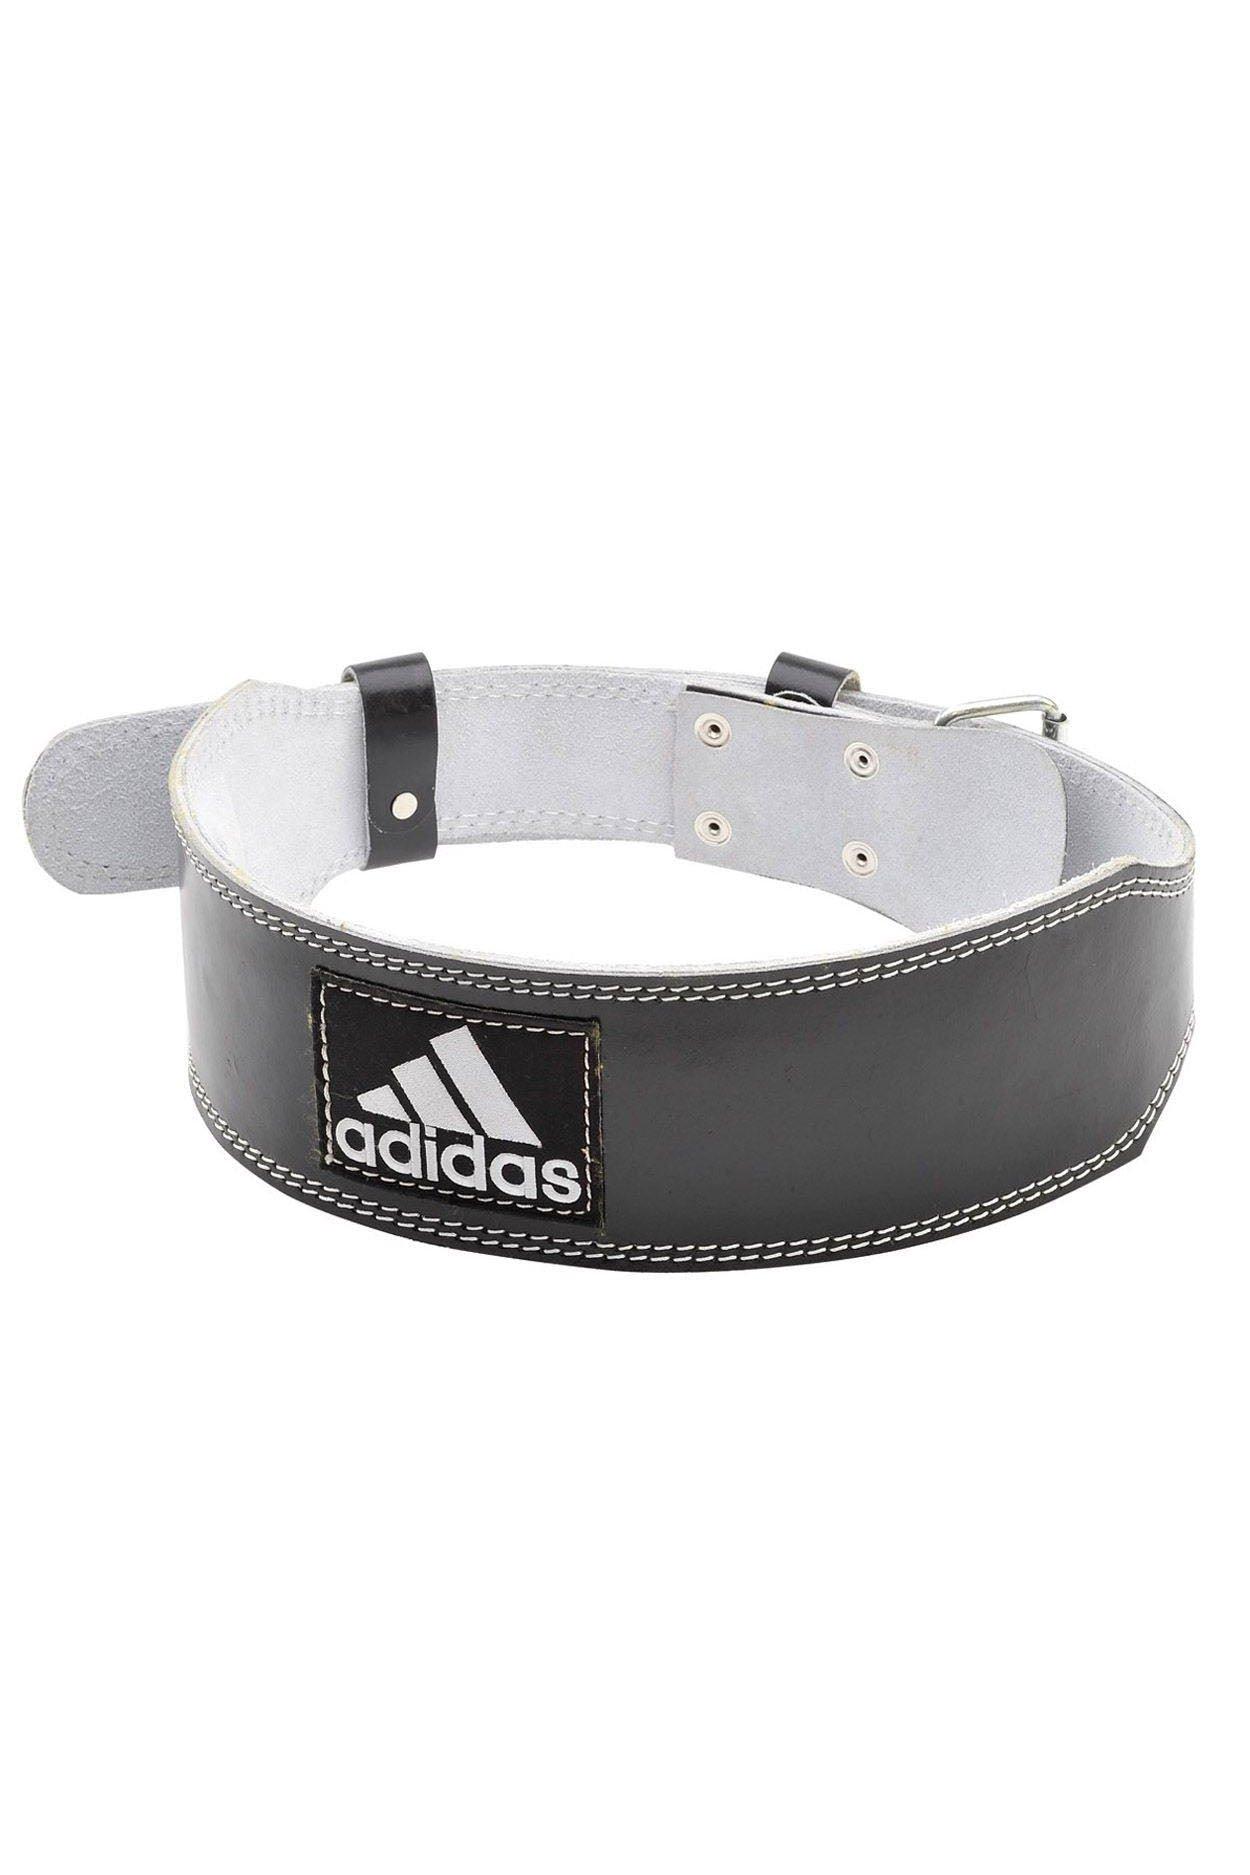 Adidas Leather Weight Lifting Belt|Size: L|black